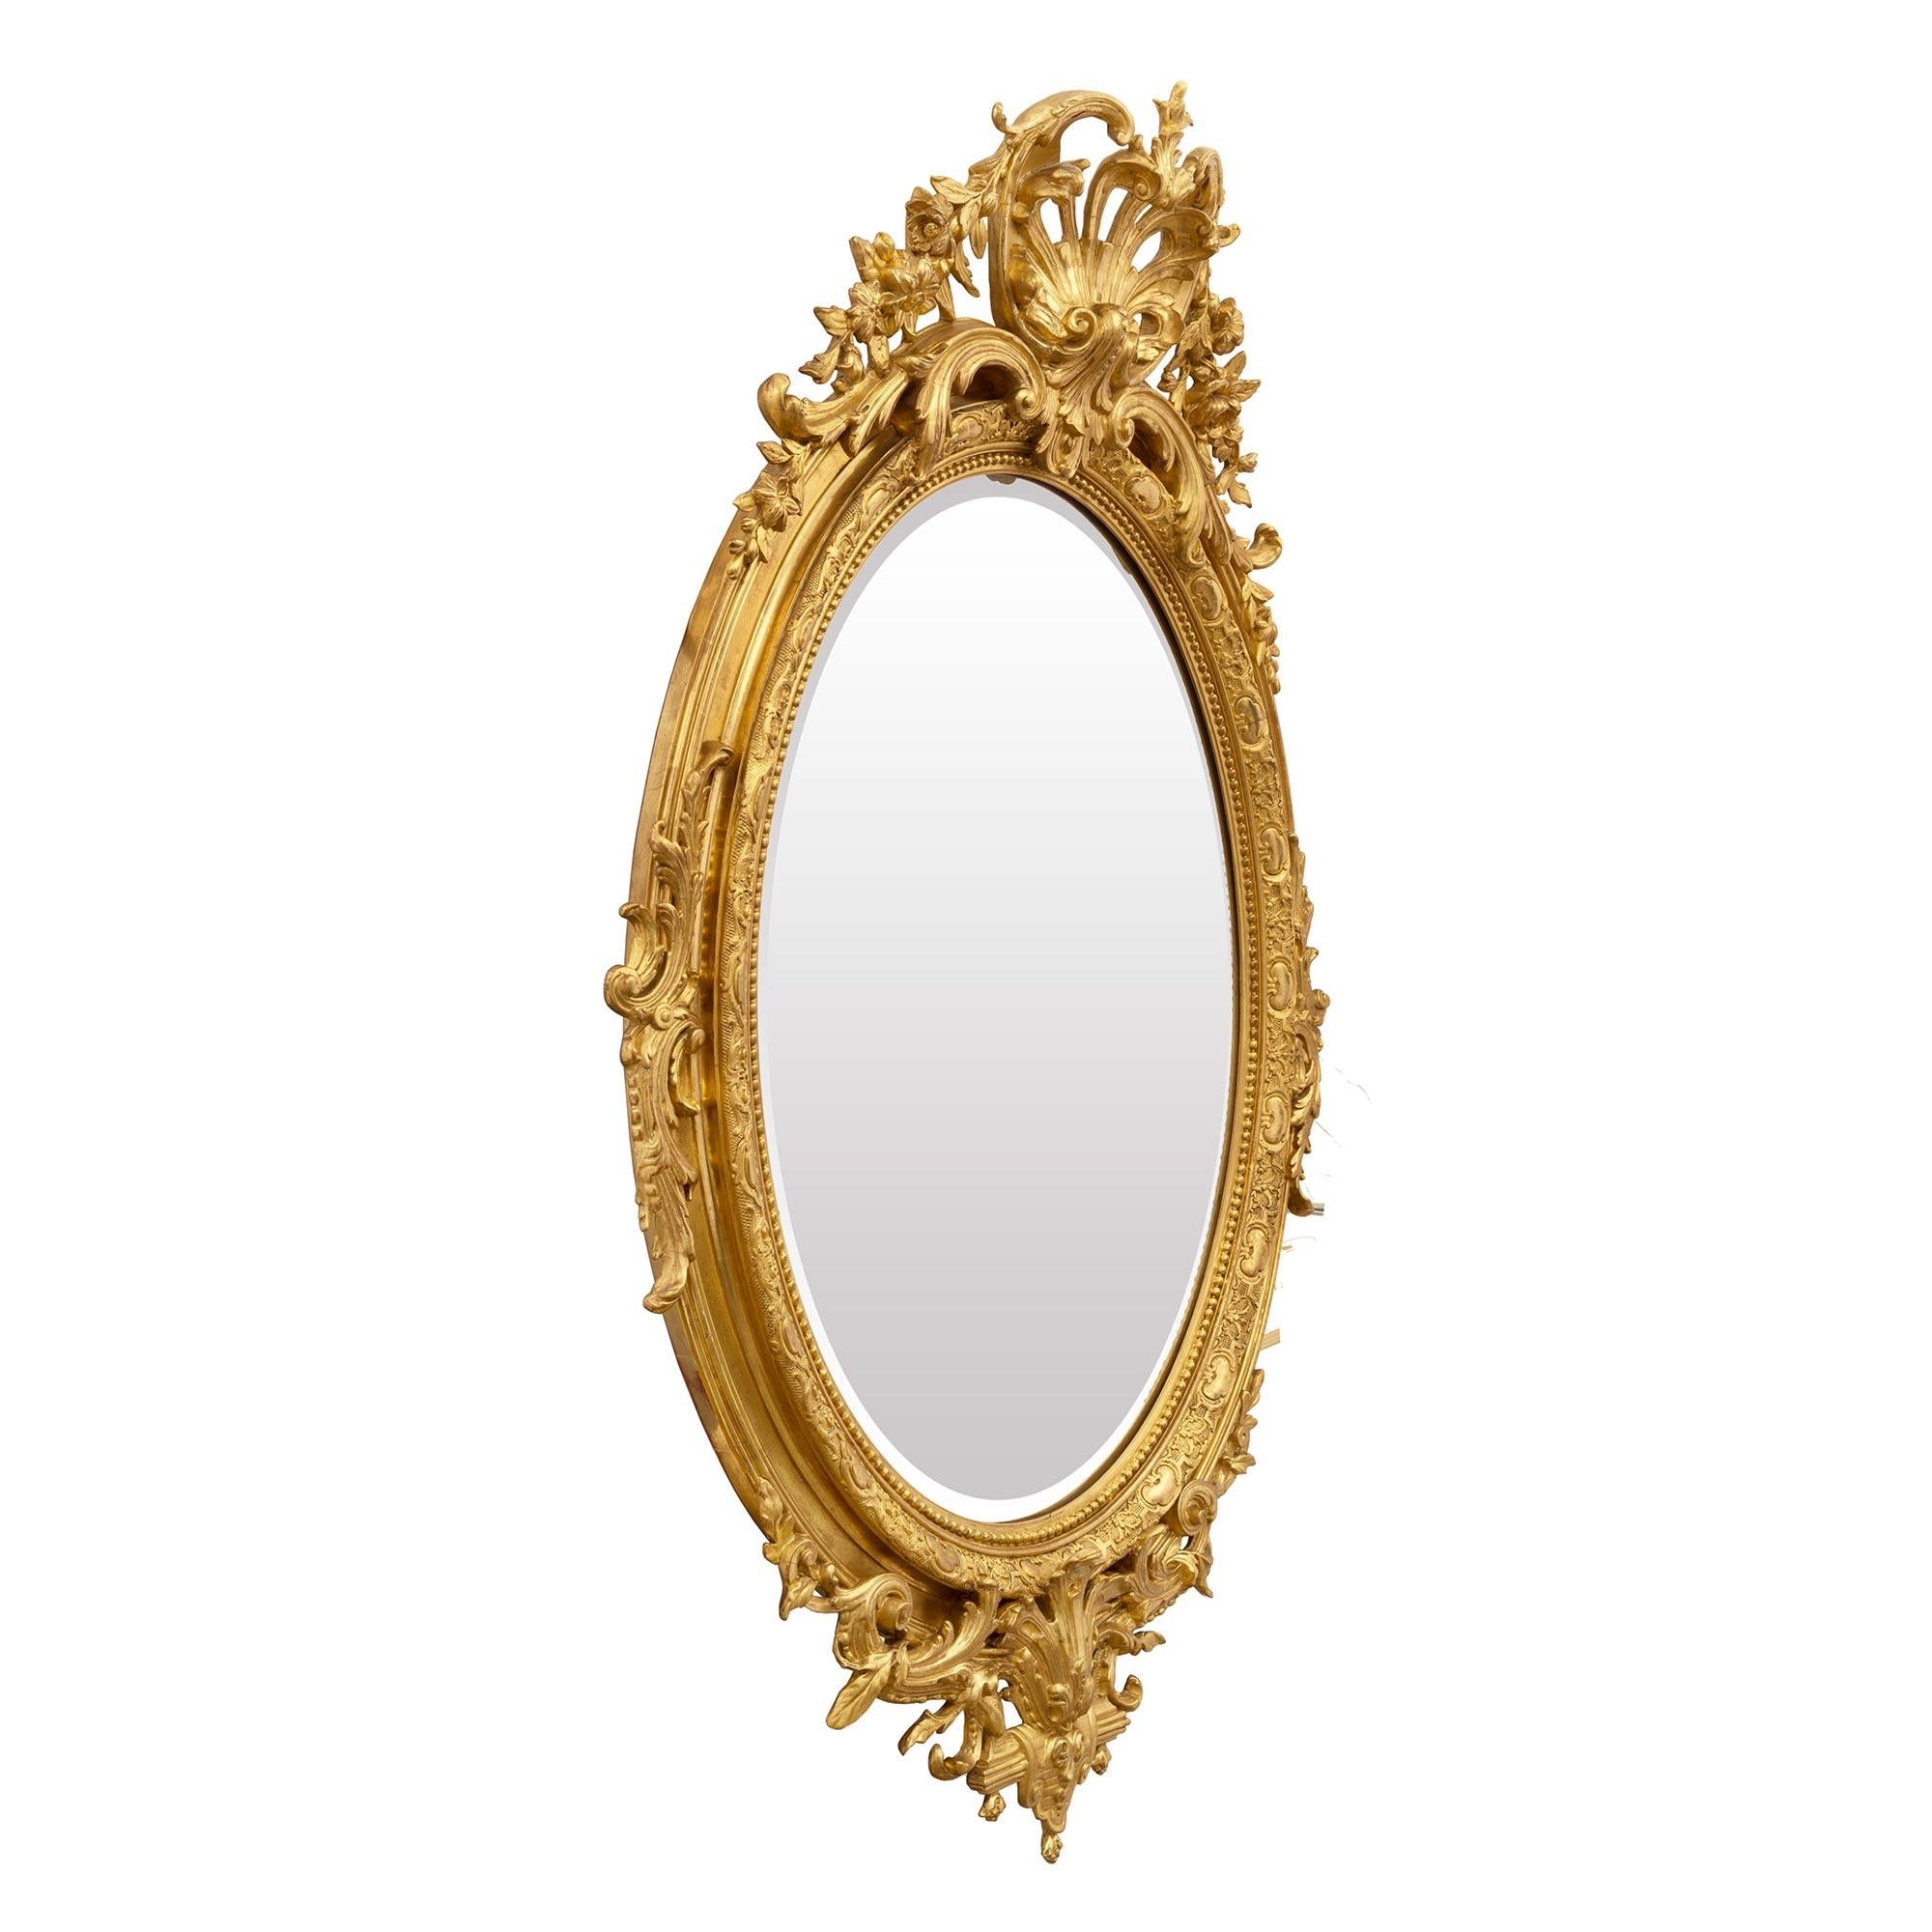 A most elegant French 19th century Louis XVI st. giltwood oval mirror. The original beveled mirror plate is framed within a fine beaded giltwood border and beautiful decorative foliate carved movements. At the base are exceptional scrolled foliate